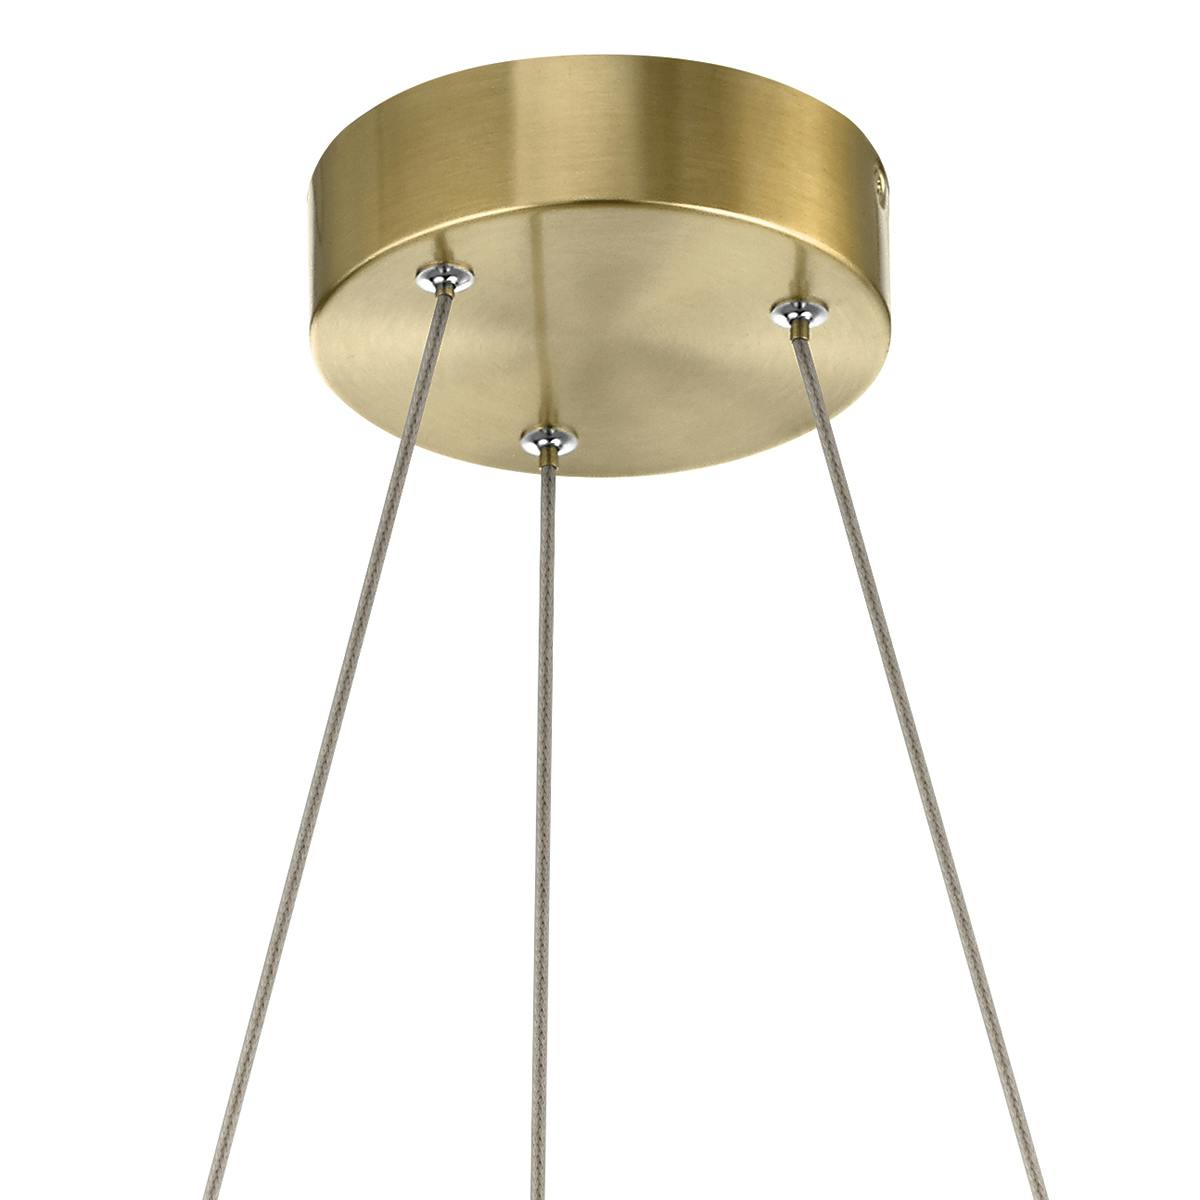 Canopy for the Arabella 3000K LED Chandelier Gold on a white background